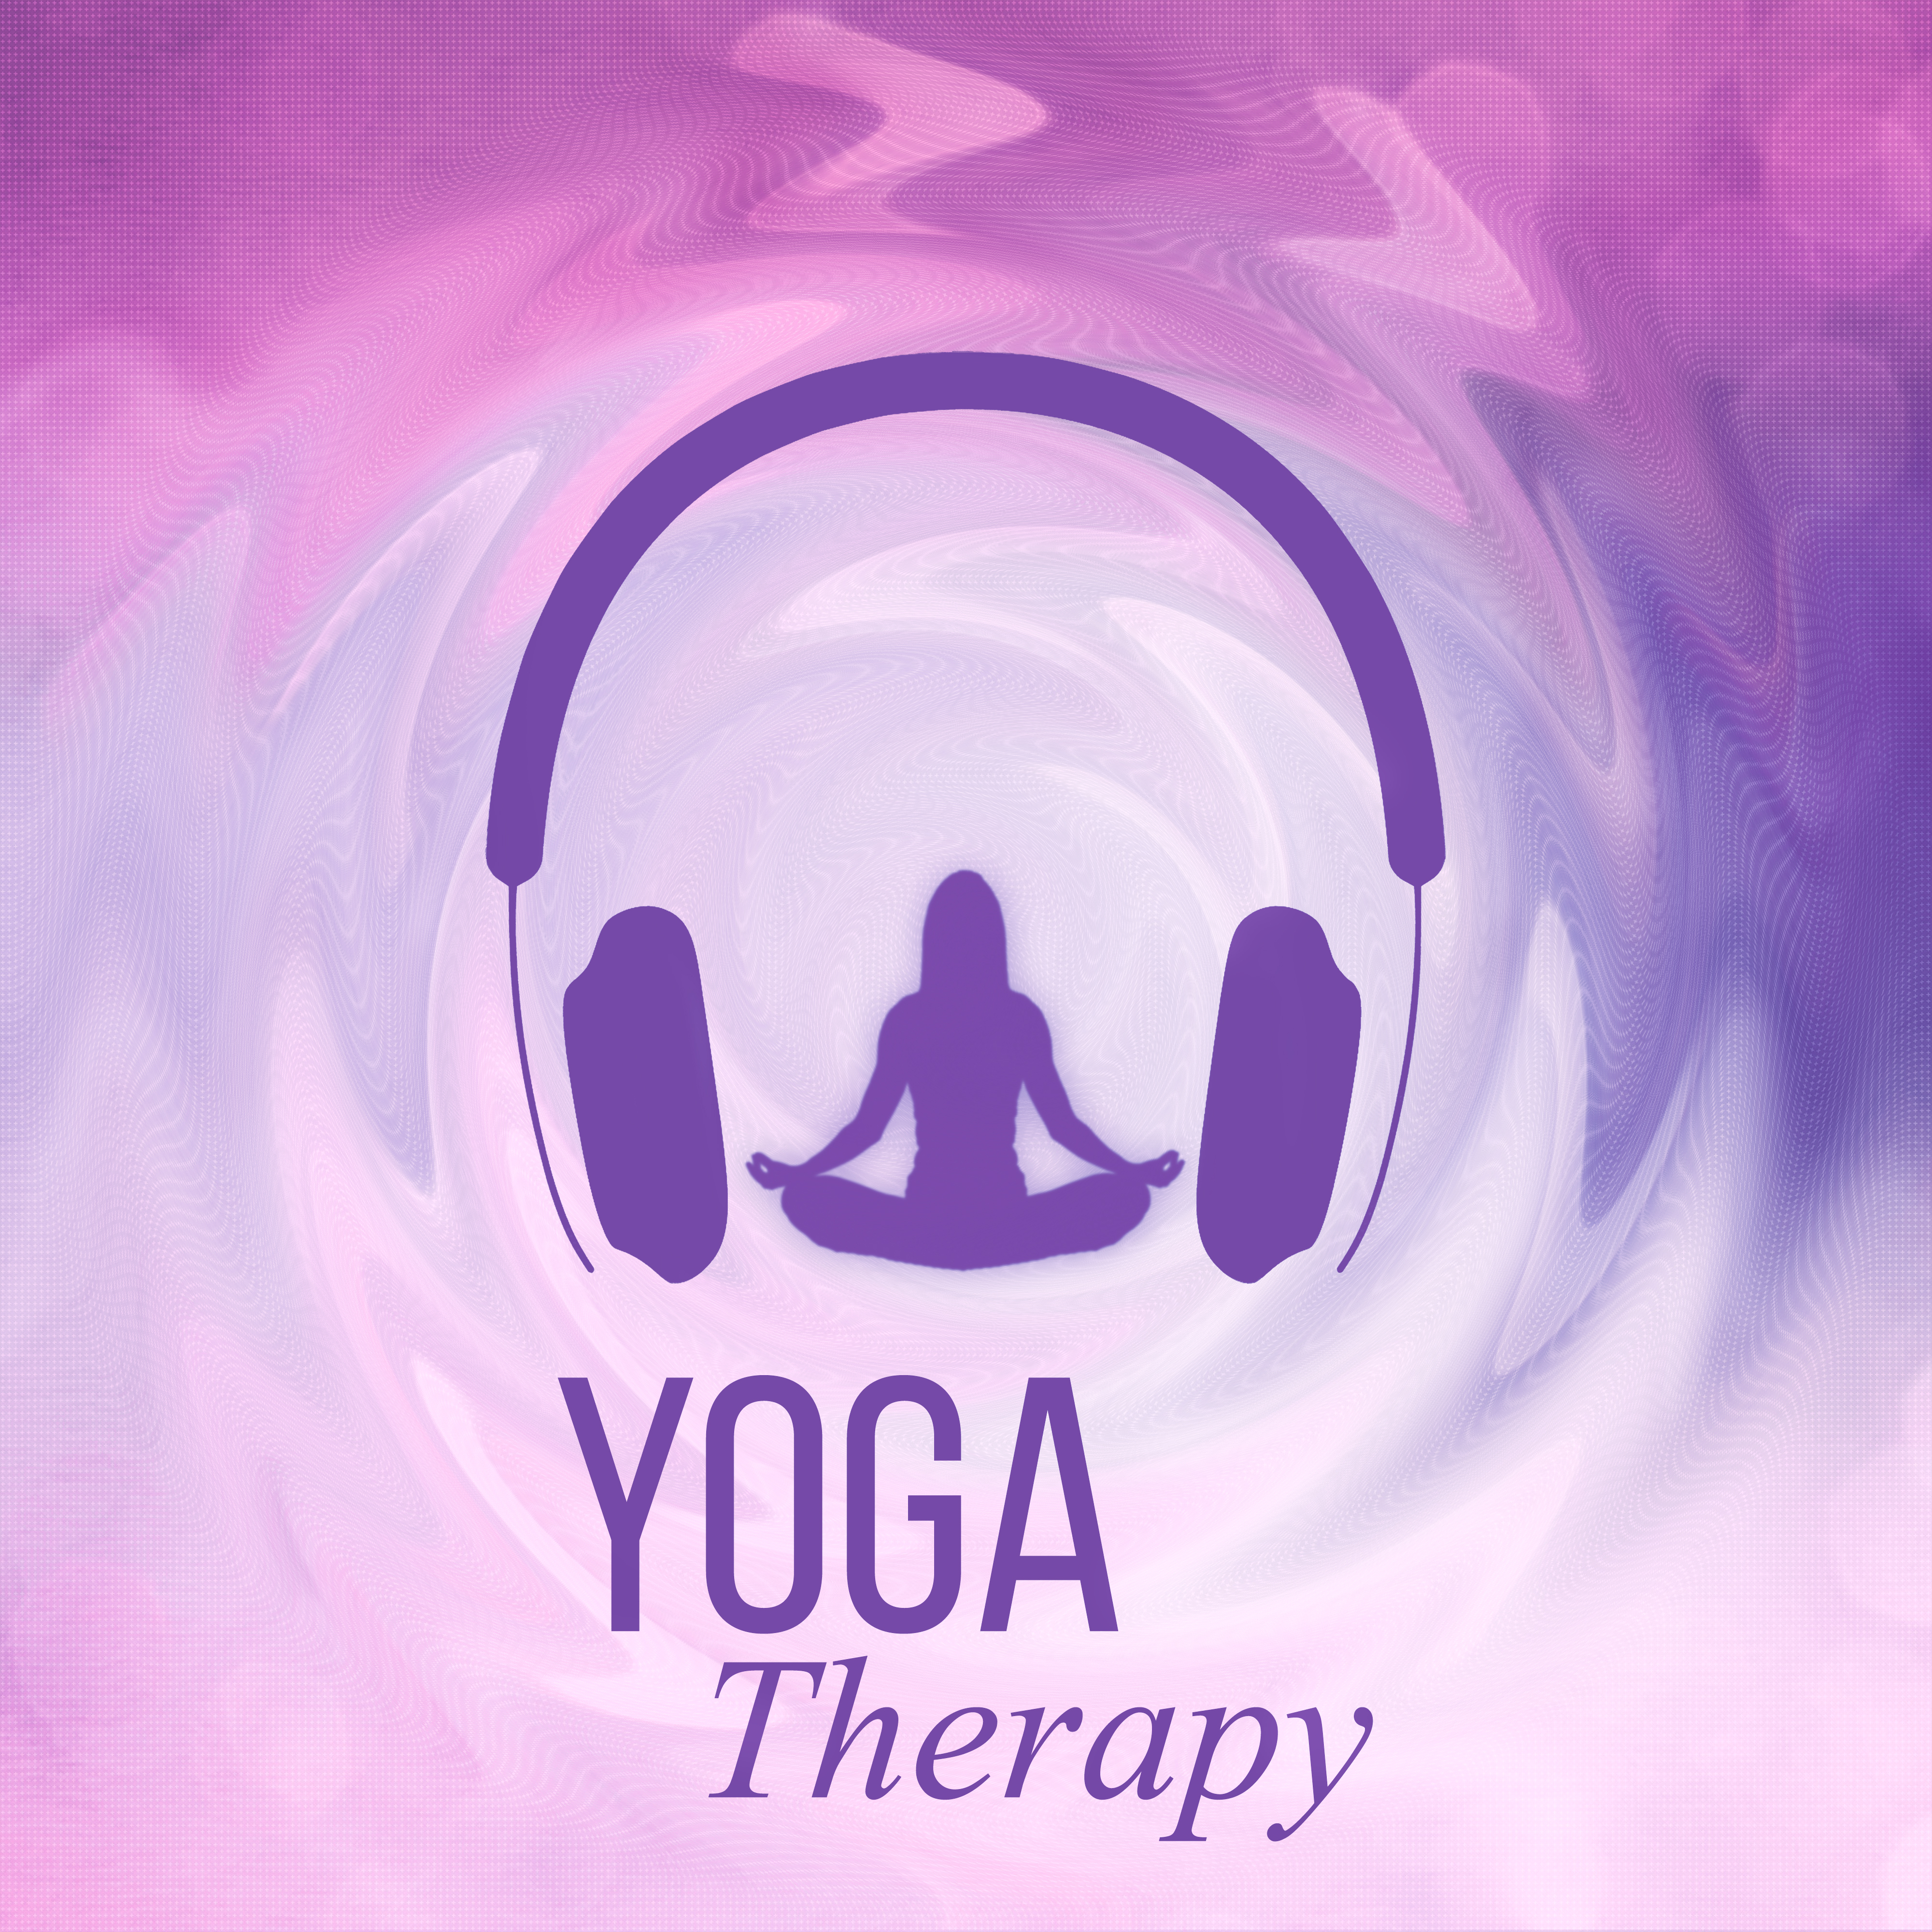 Yoga Therapy  Calming Sounds for Peace of Mind, Yoga Music, Mindfulness Meditation, Zen Music, Reiki Healing, Mantras, Harmony  Serenity